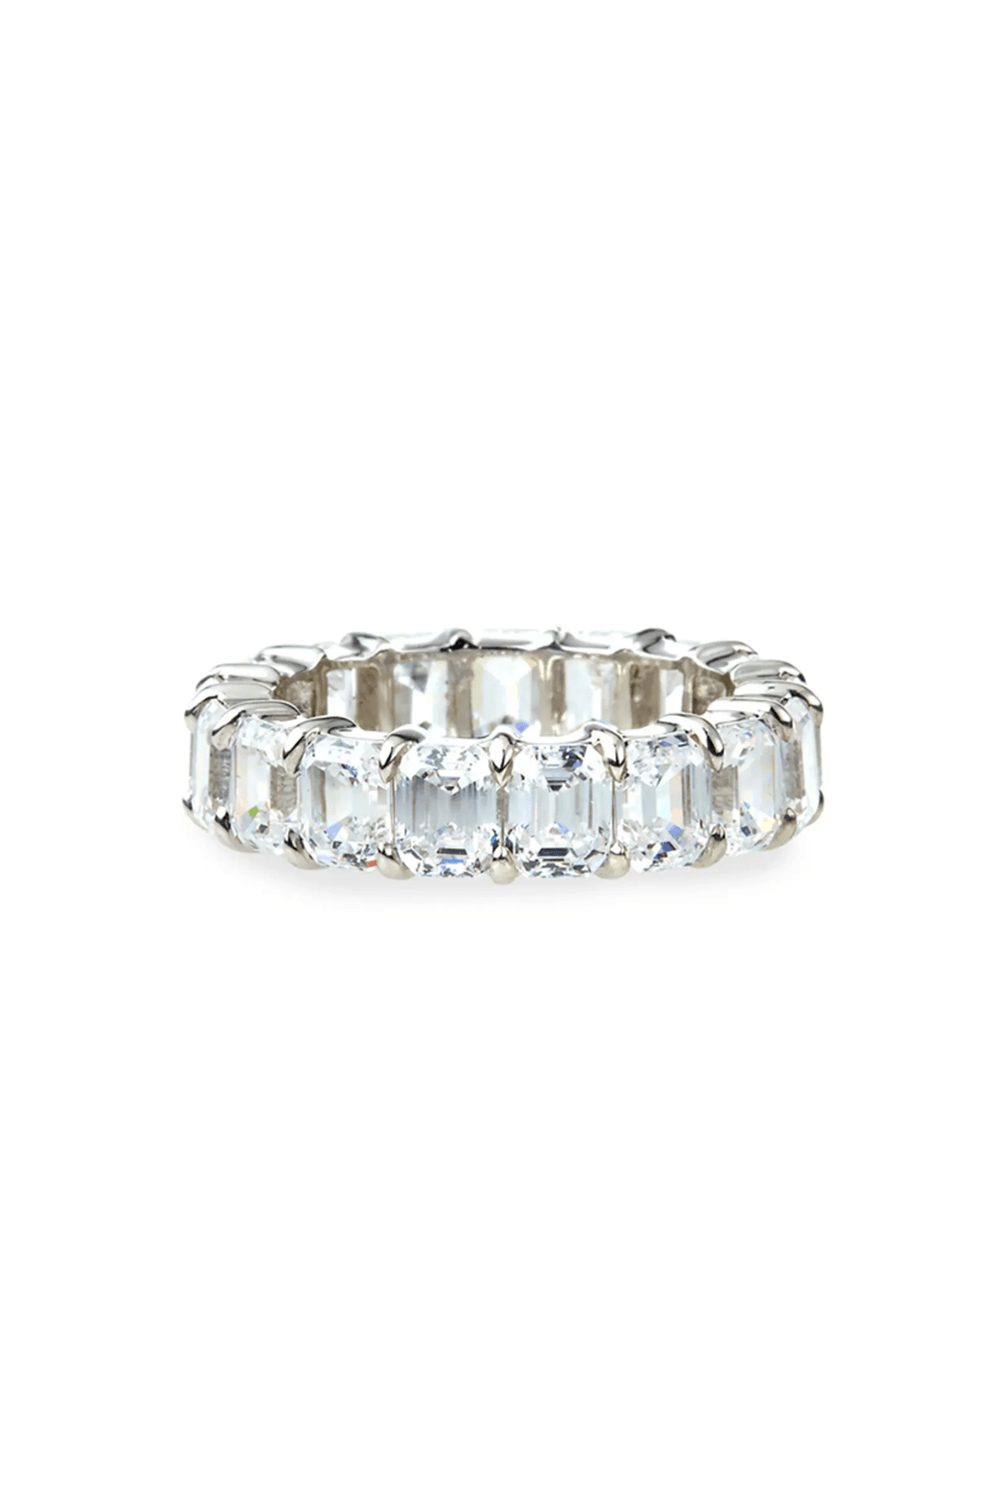 Emerald Cut Eternity Band JEWELRYBOUTIQUERING FANTASIA by DESERIO   